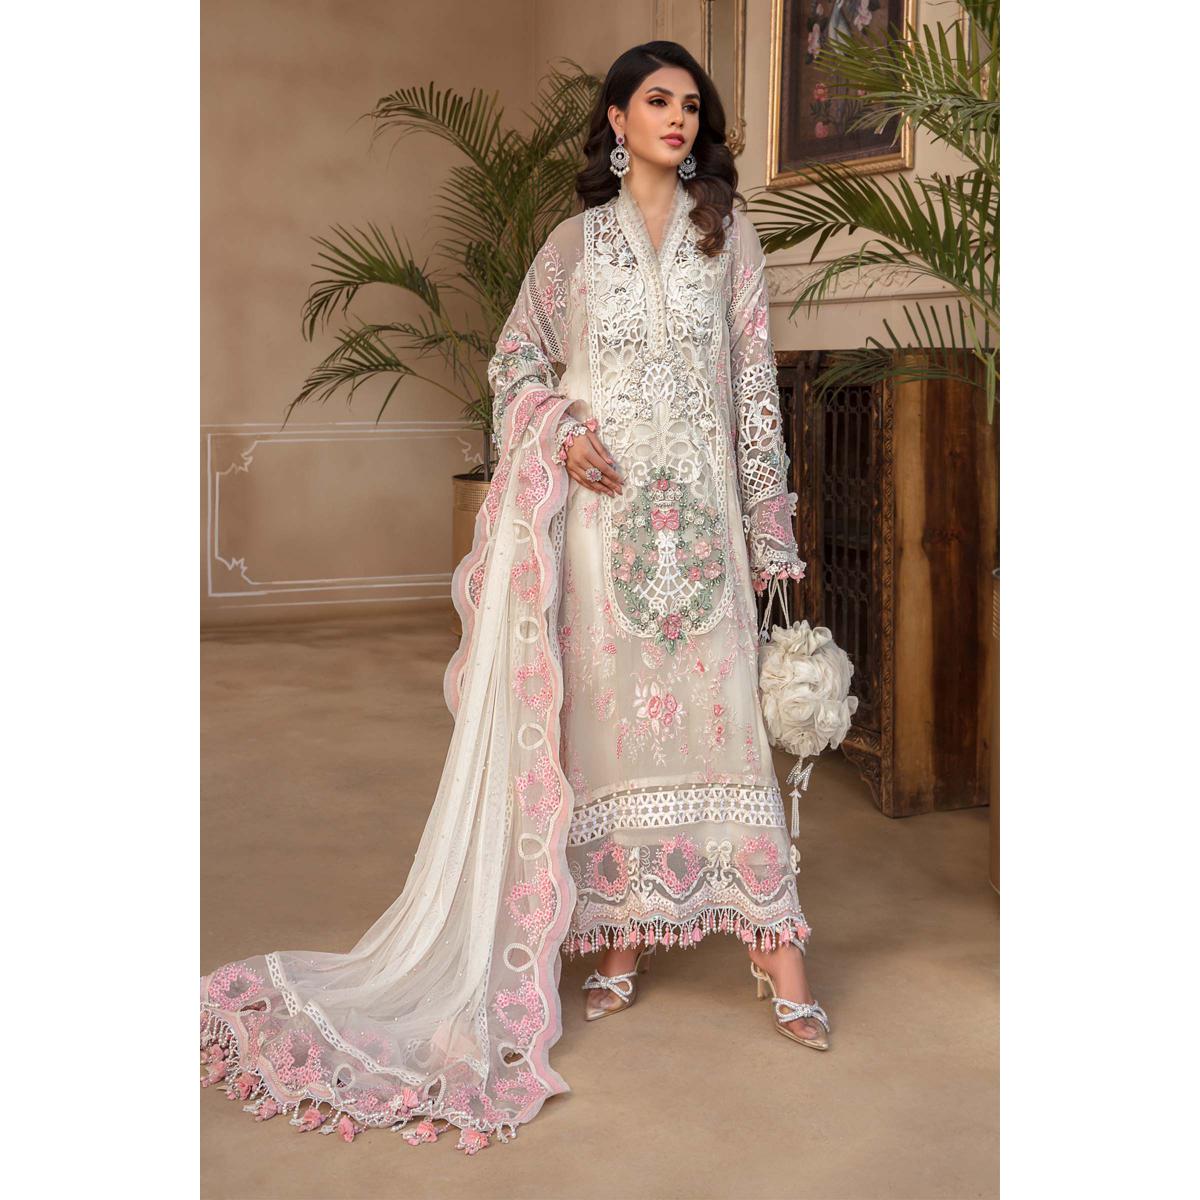 Maria B Eid Heritage Eid Organza Jacquard Unstitched Women 3 Piece Suit Mbroidered - Off White Bd-2604